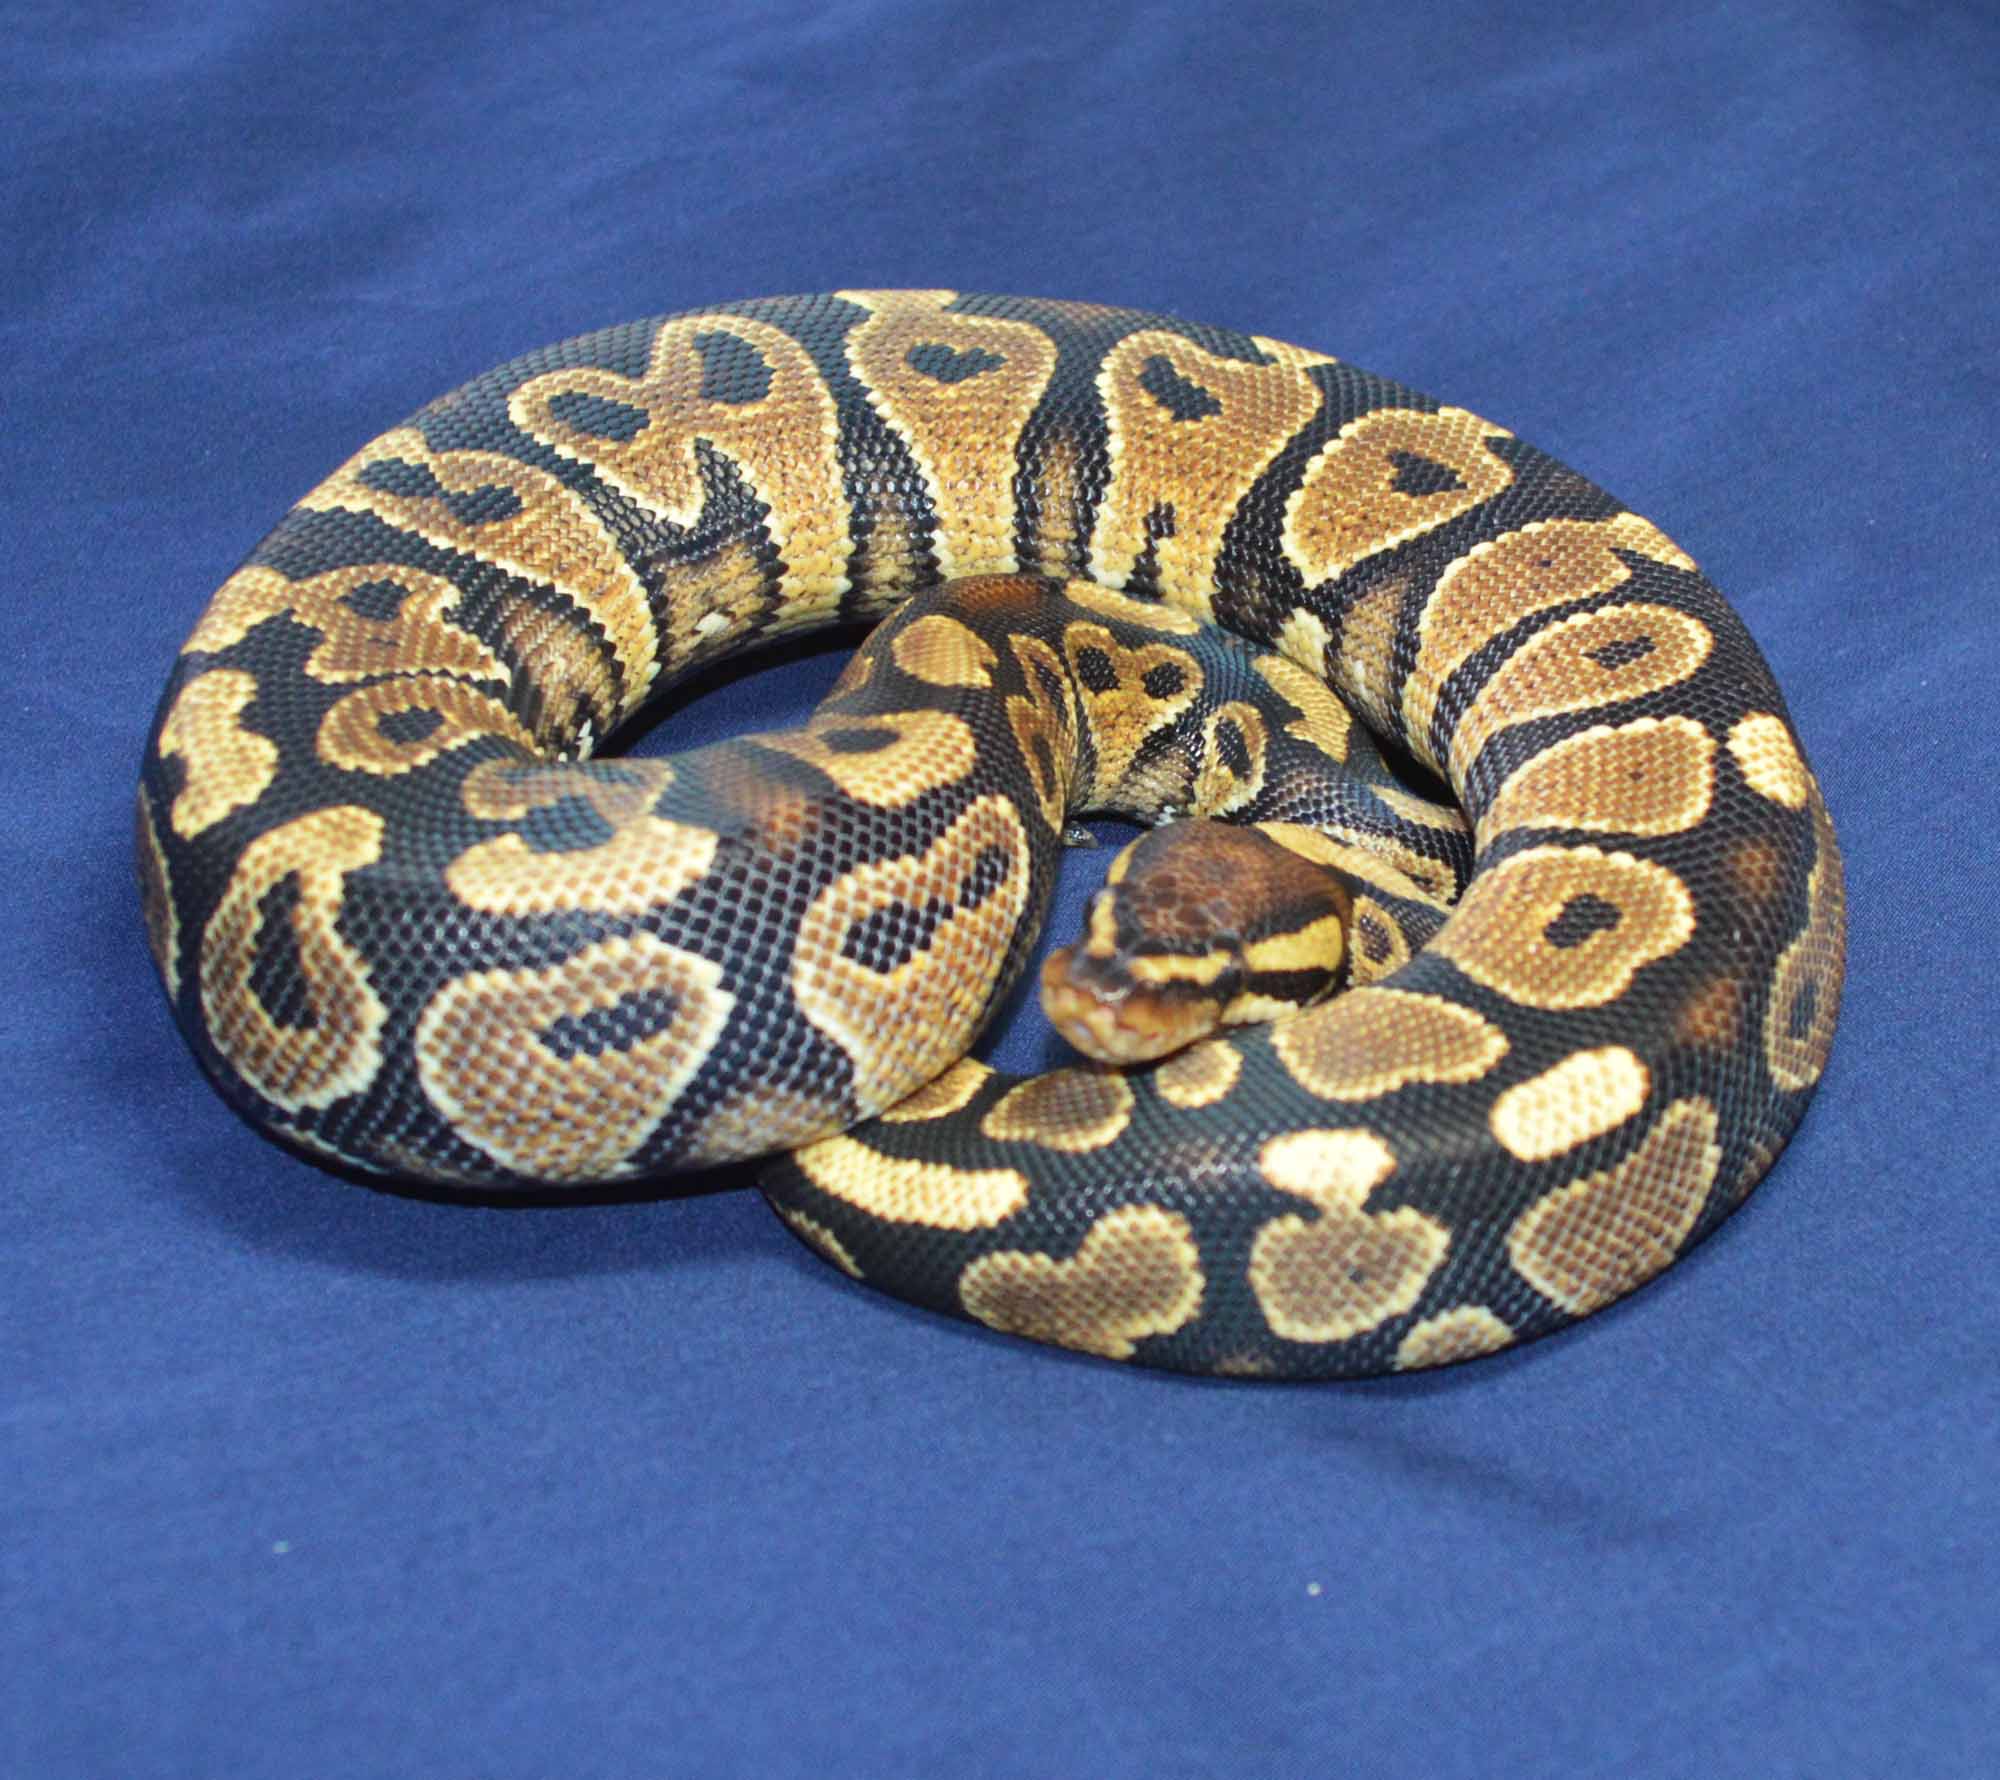 Wookie Ball Python by The Herp Vault